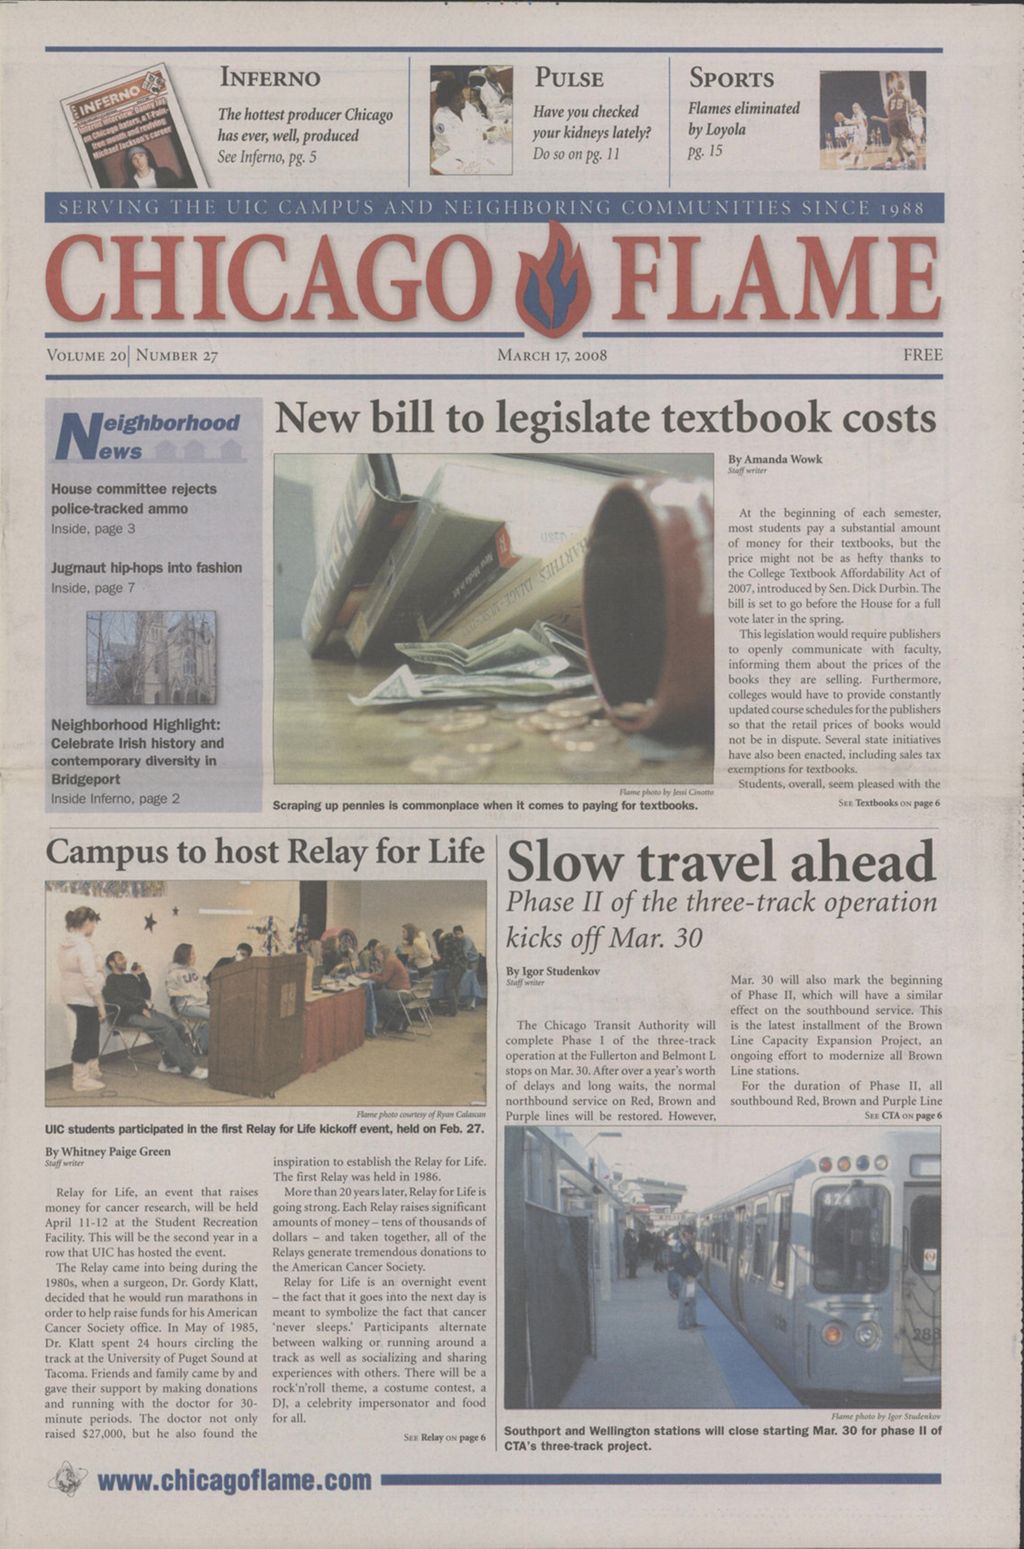 Miniature of Chicago Flame (March 17, 2008)